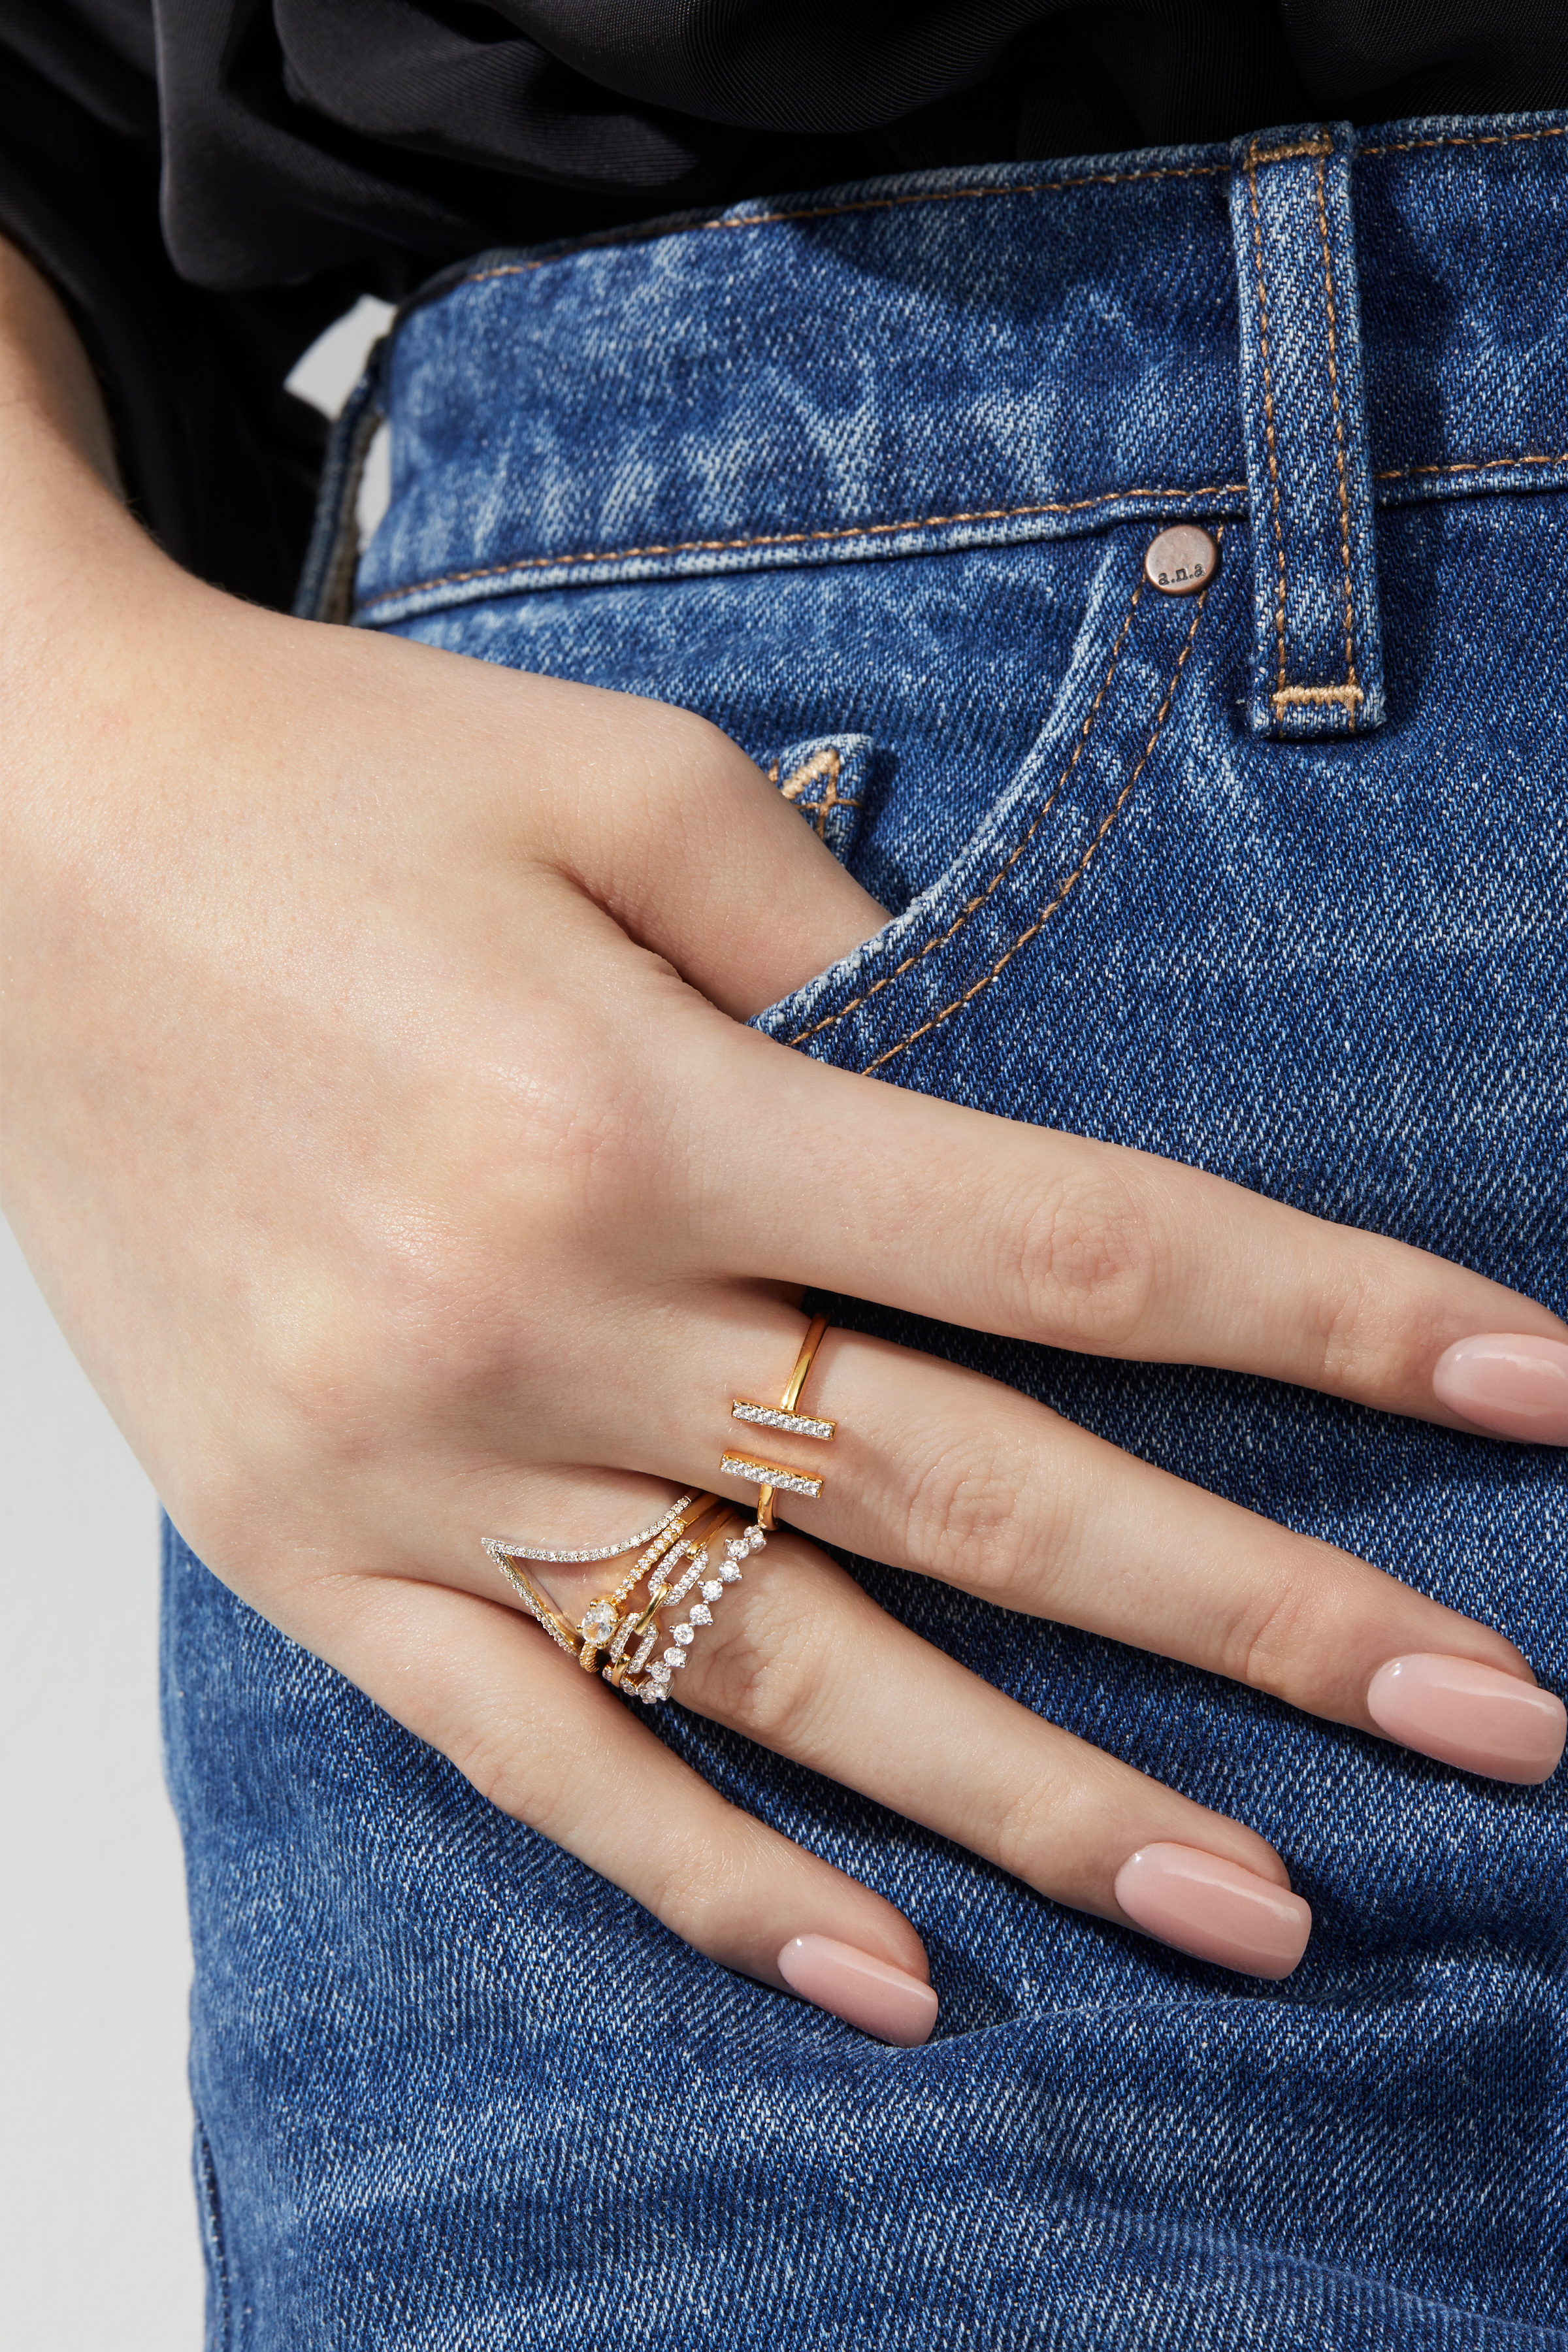 How to style rings and wear rings on multiple fingers